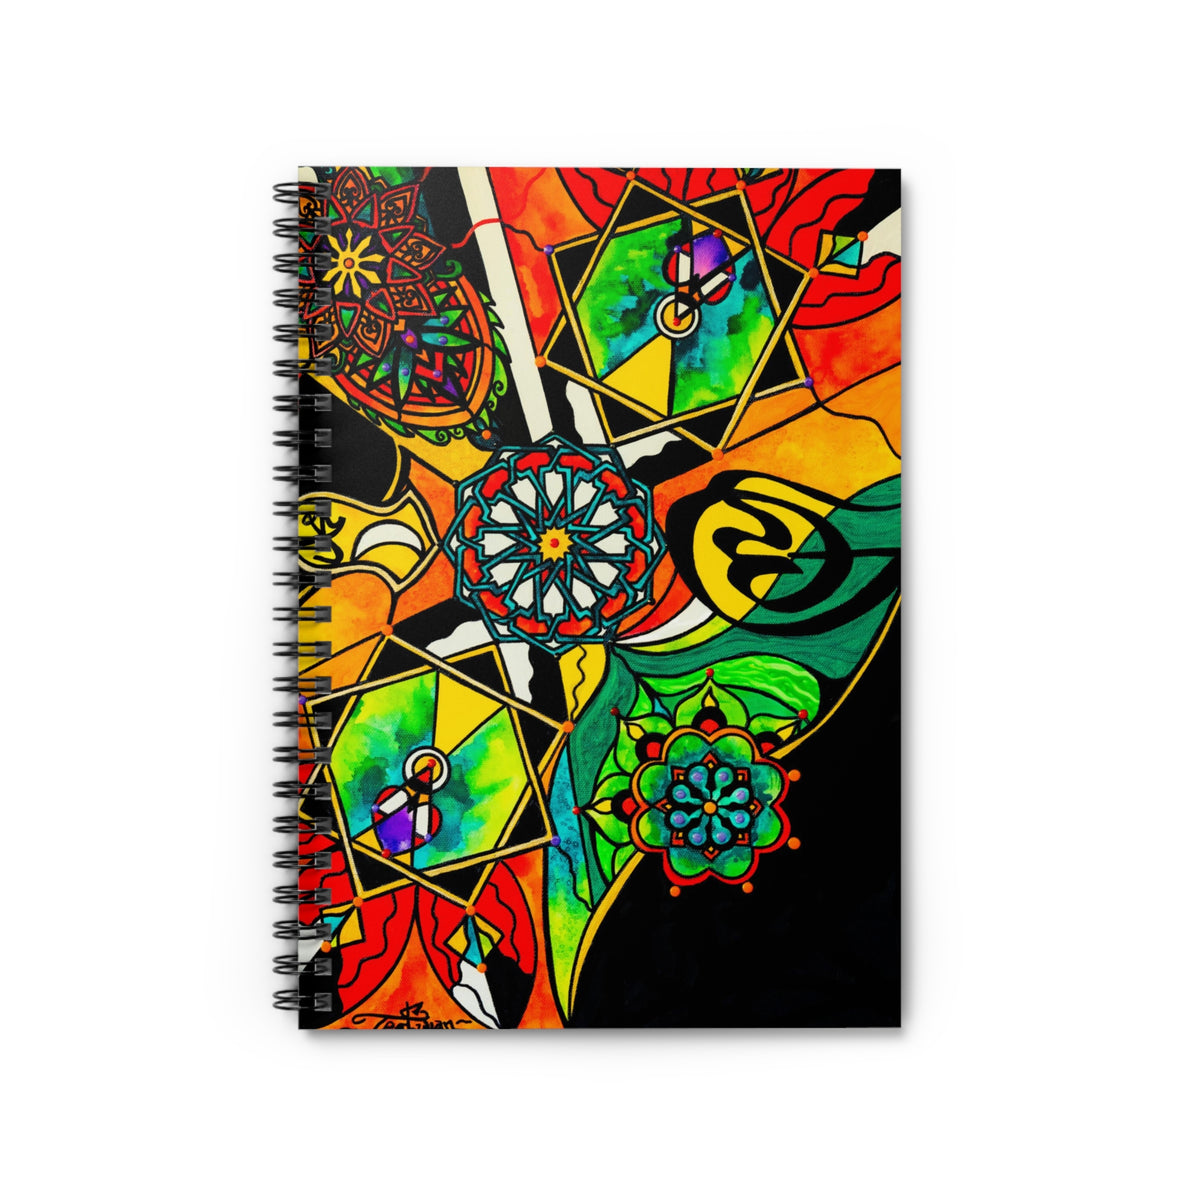 Muhammad Consciousness - Spiral Notebook - Ruled Line